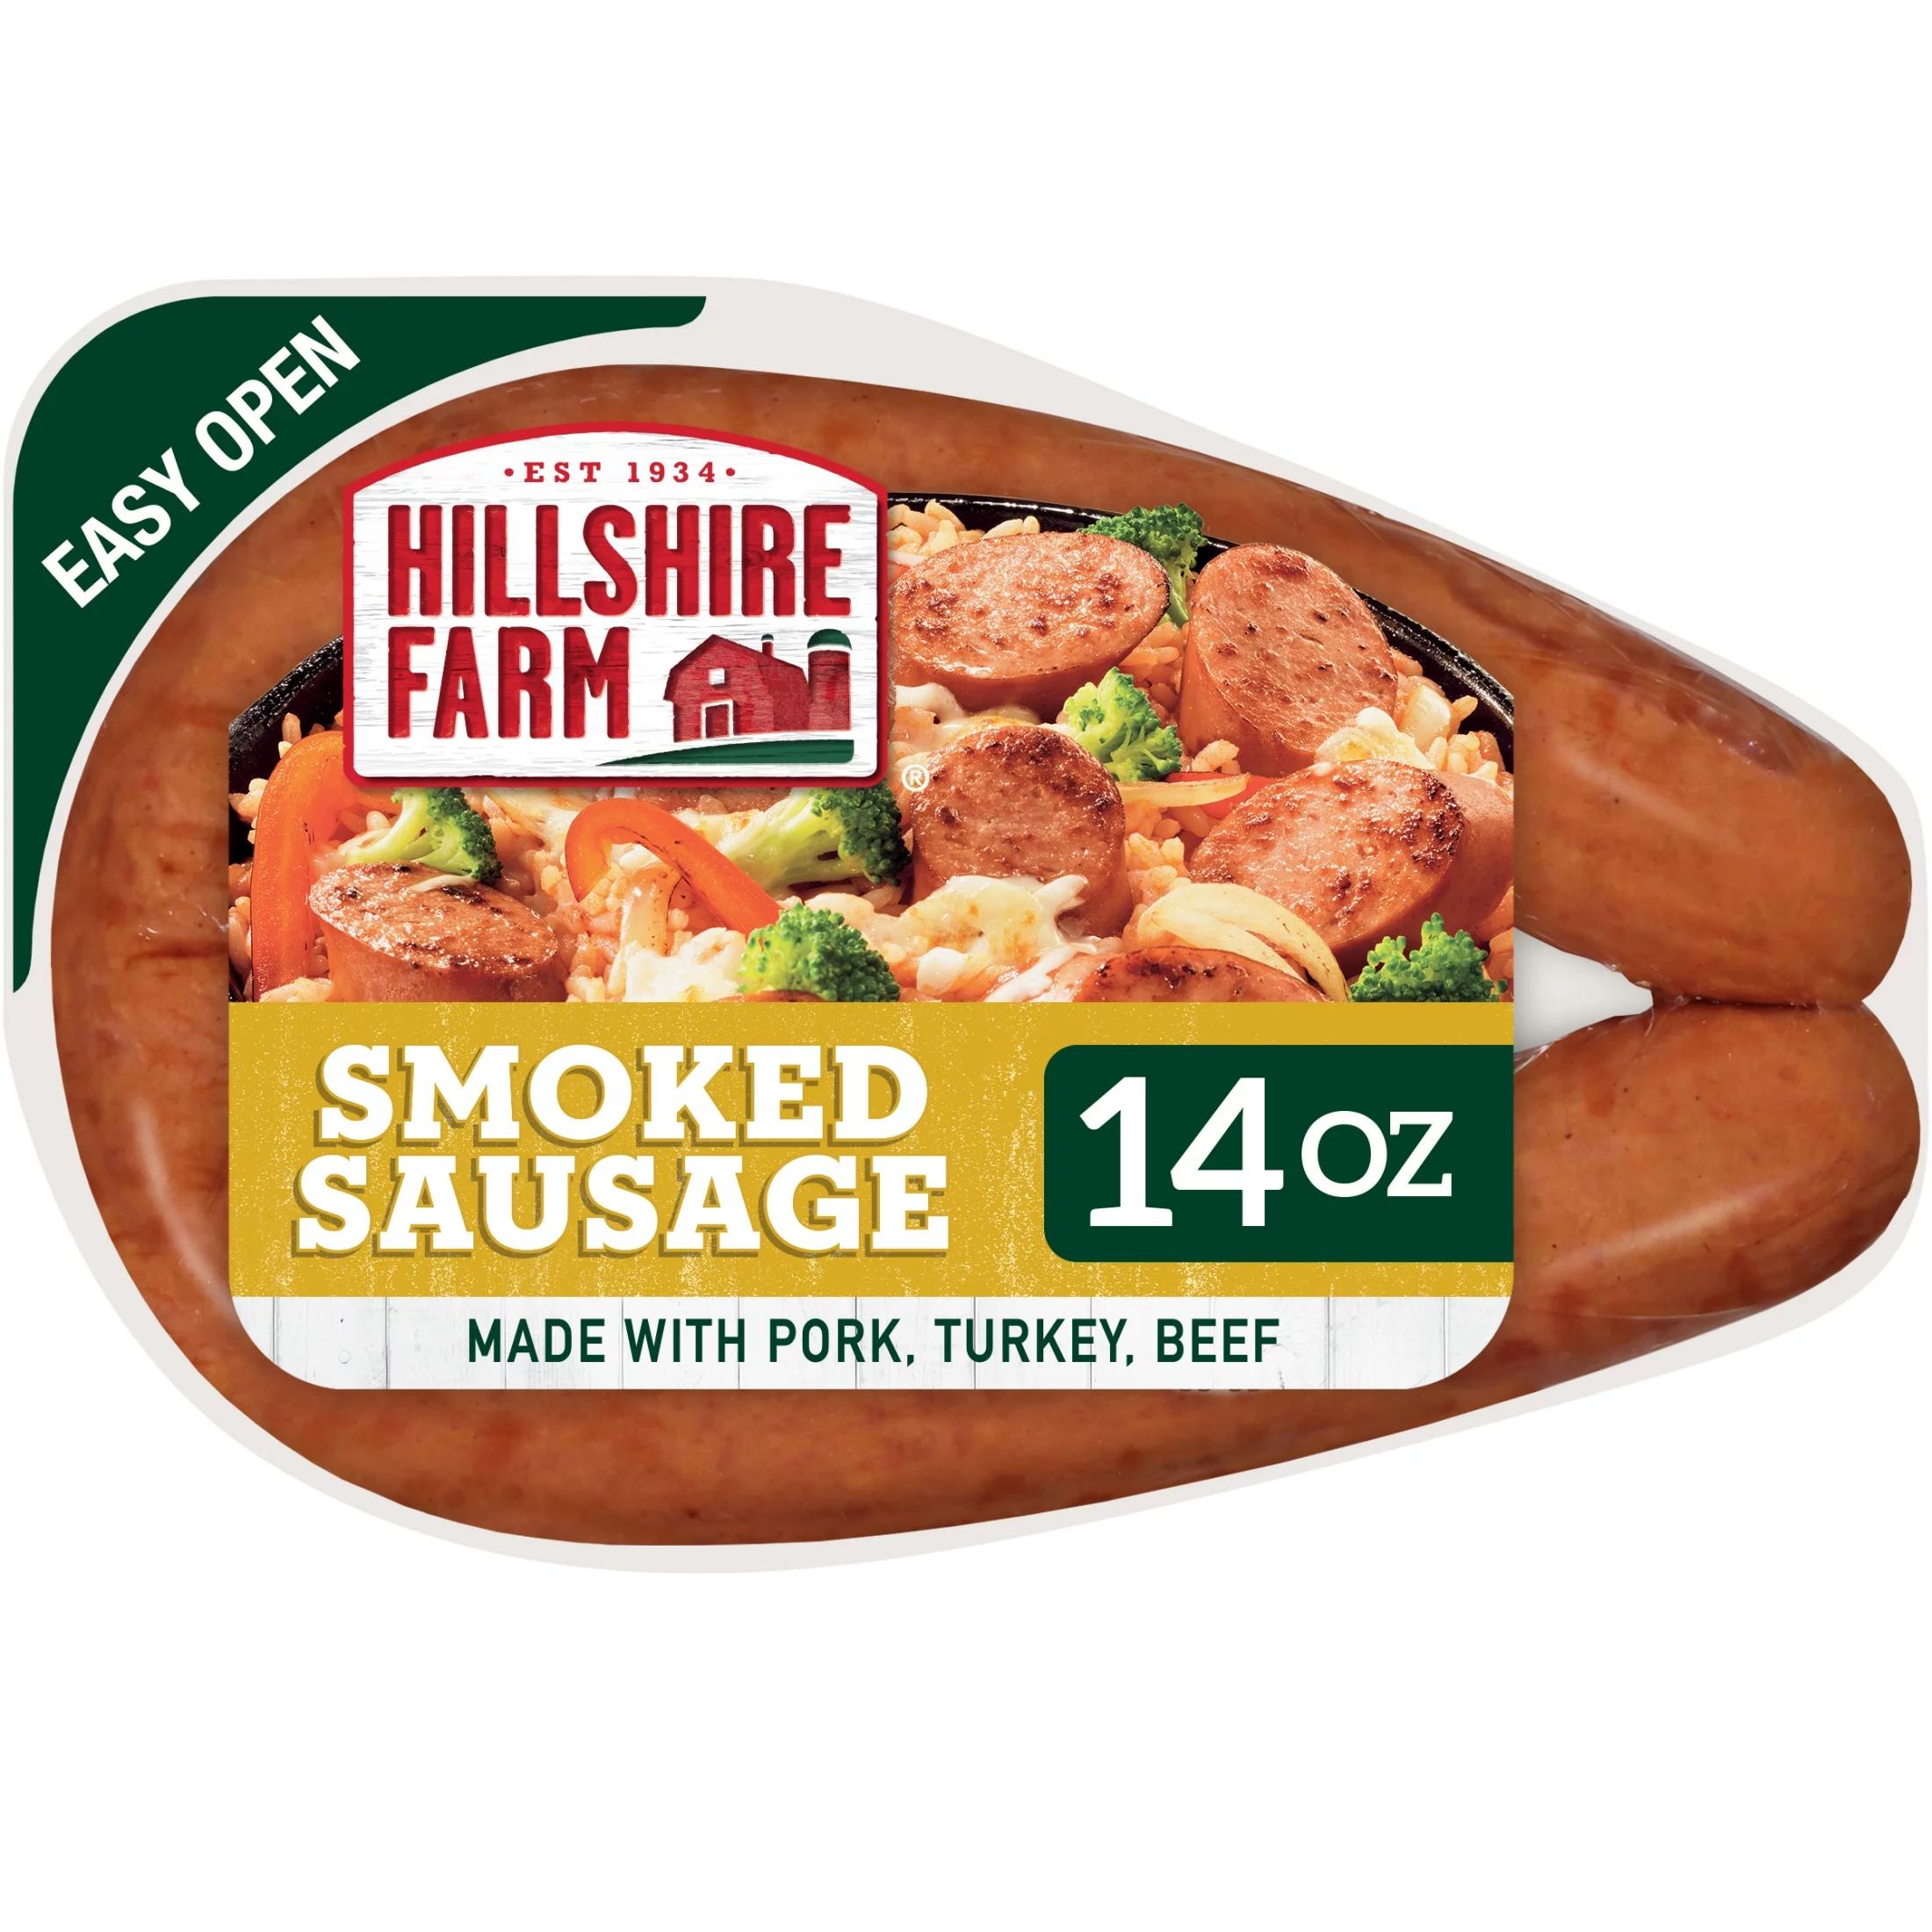 smoked sausages - What's the best type of sausage for smoking